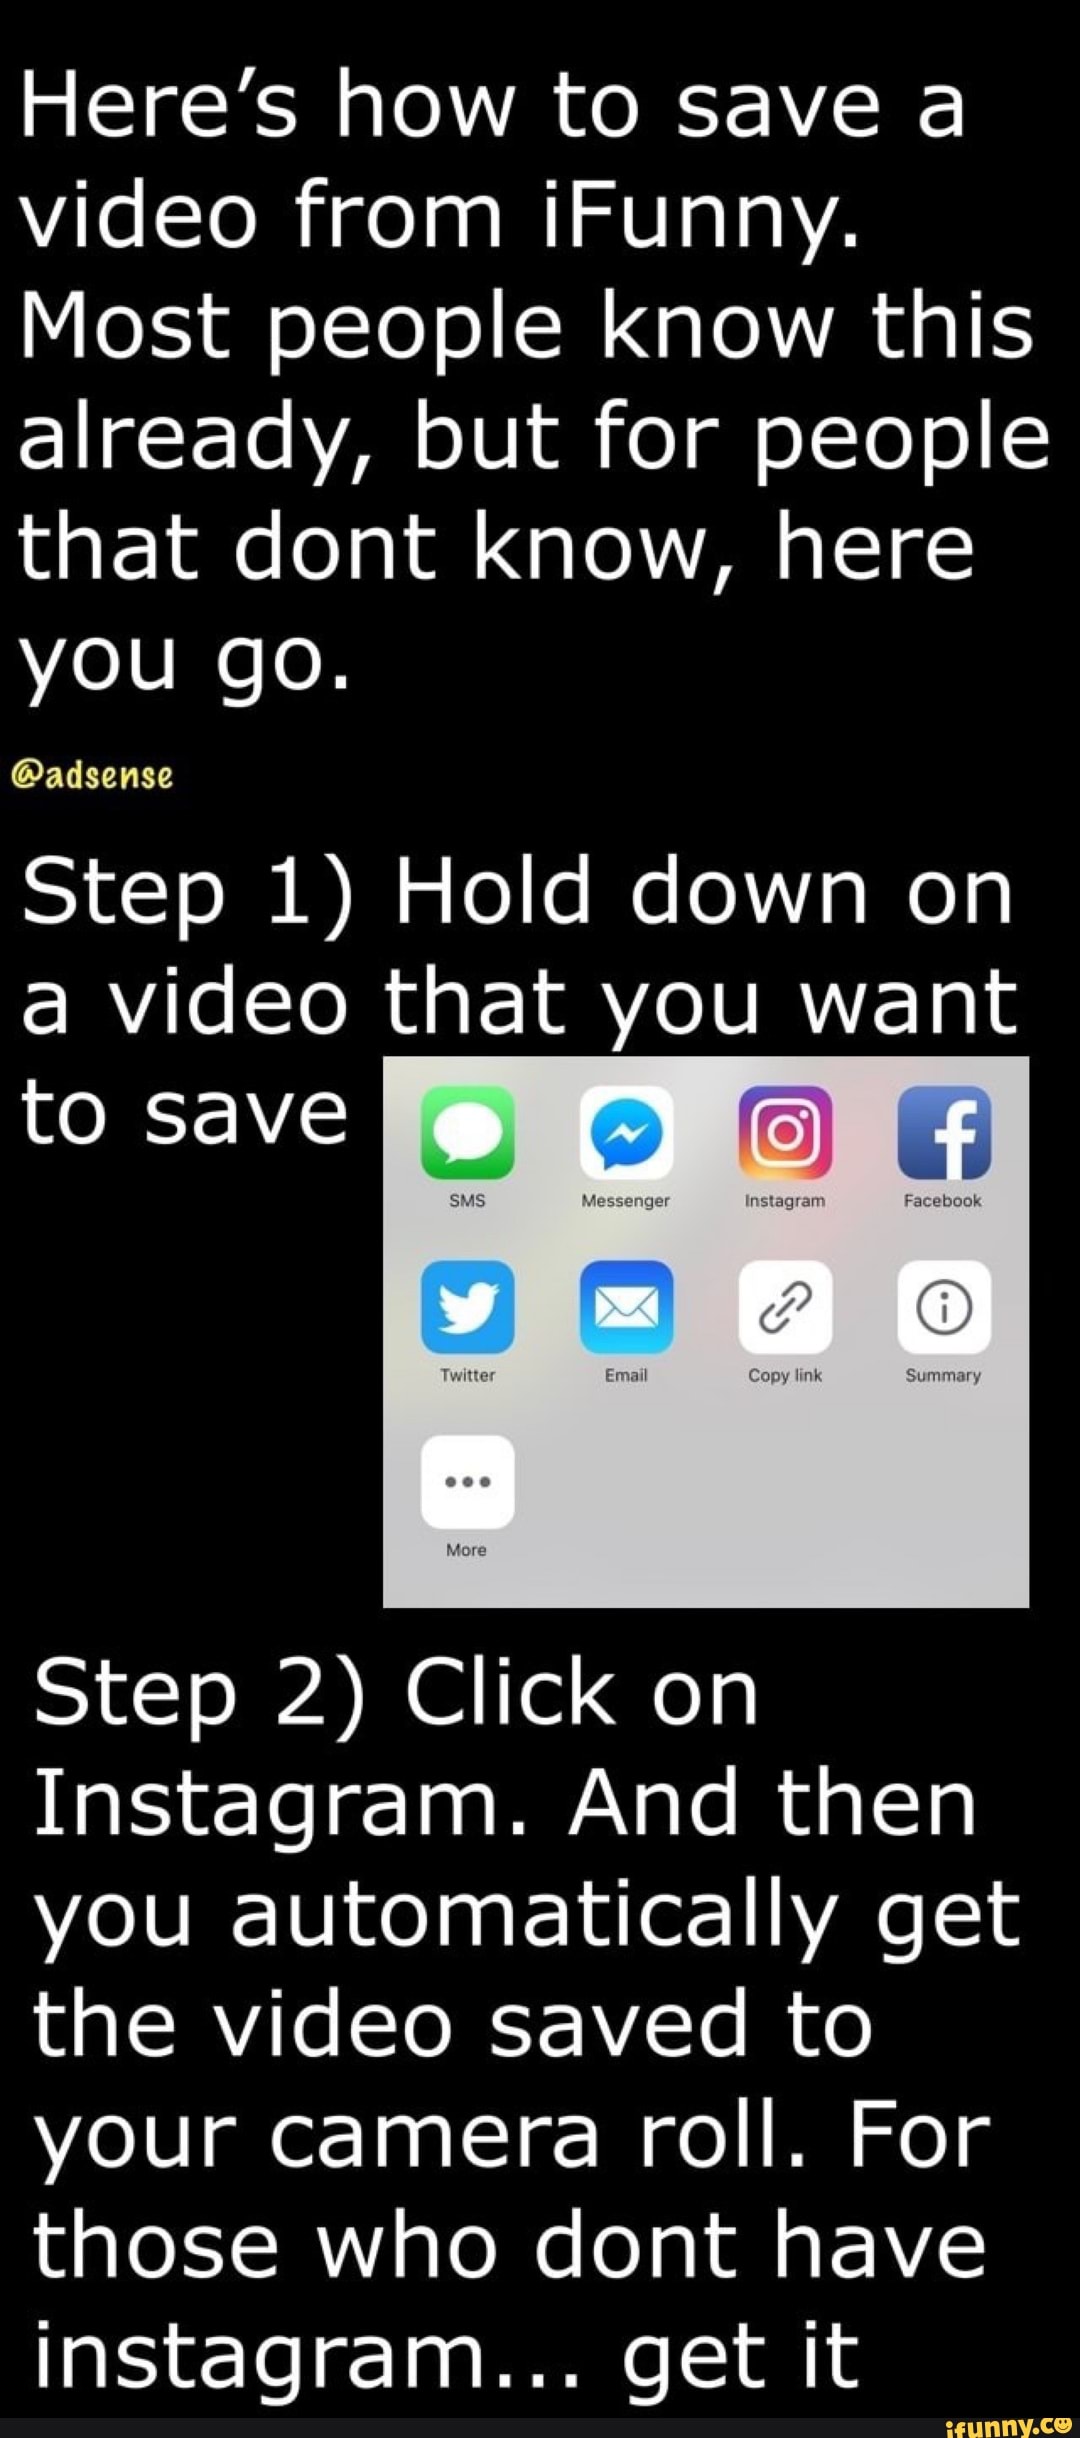 Here's how to save a video from iFunny. Most people know this already, but for people